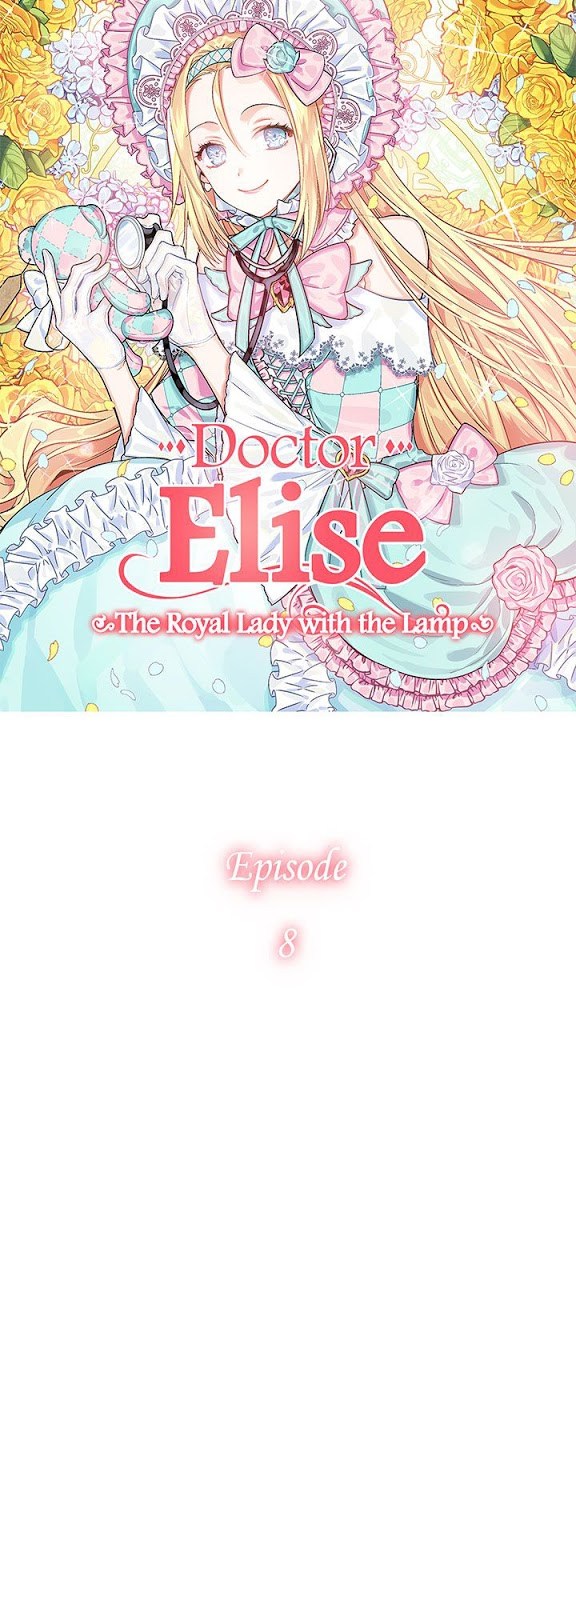 Doctor Elise: The Royal Lady With the Lamp Chapter 8